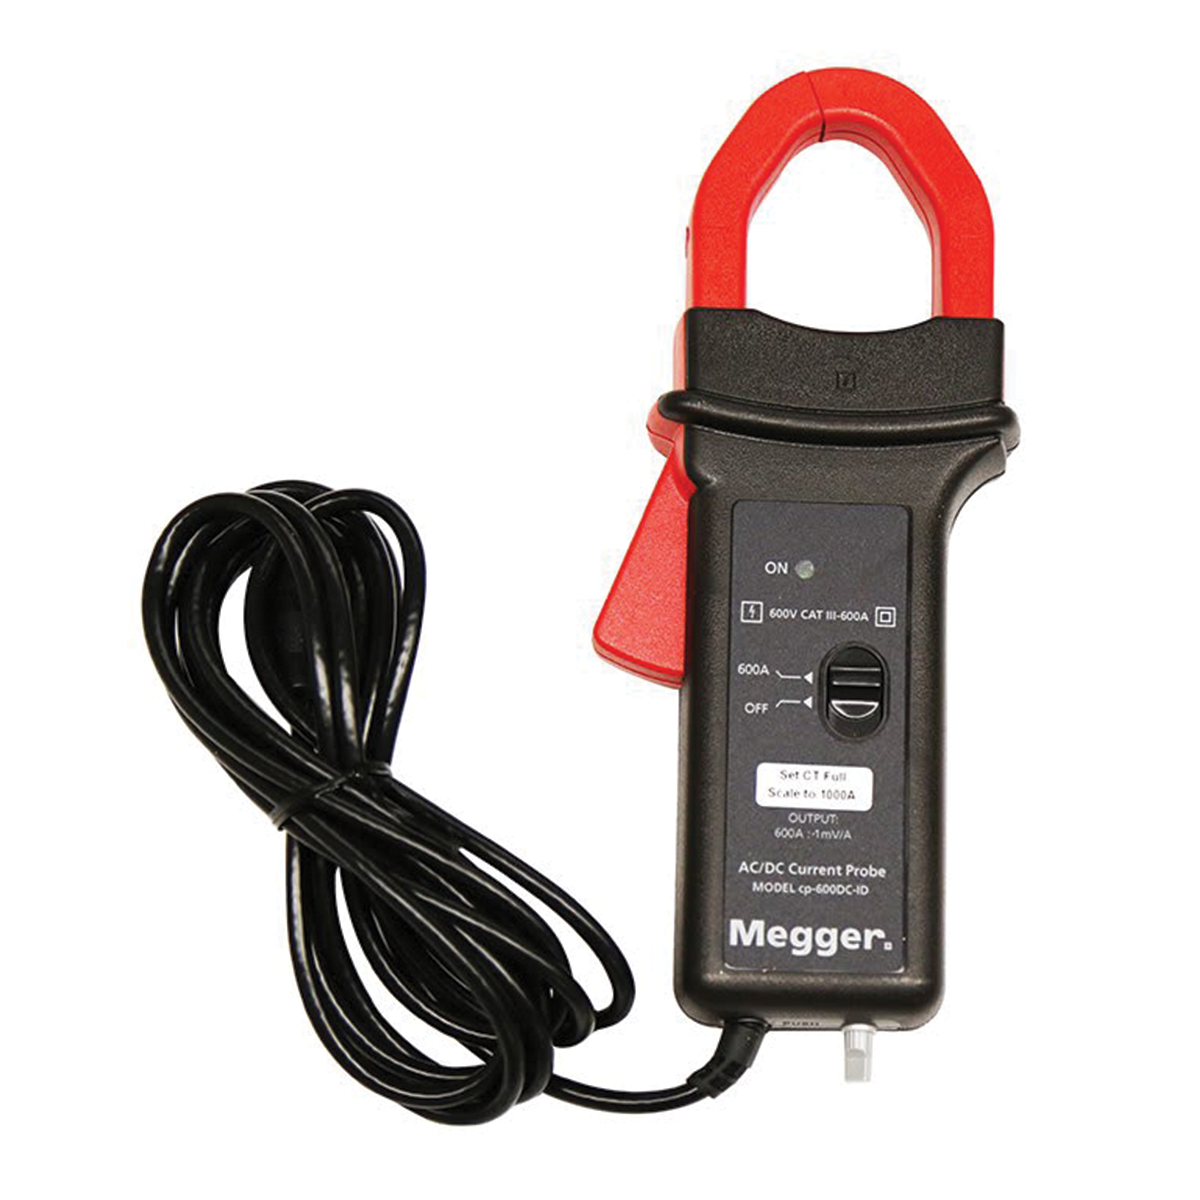 MEGGER CP-600DC-ID-KIT Kit of 3 CP-600DC-ID 600A High Bandwidth DC Hall Effect Current Clamps